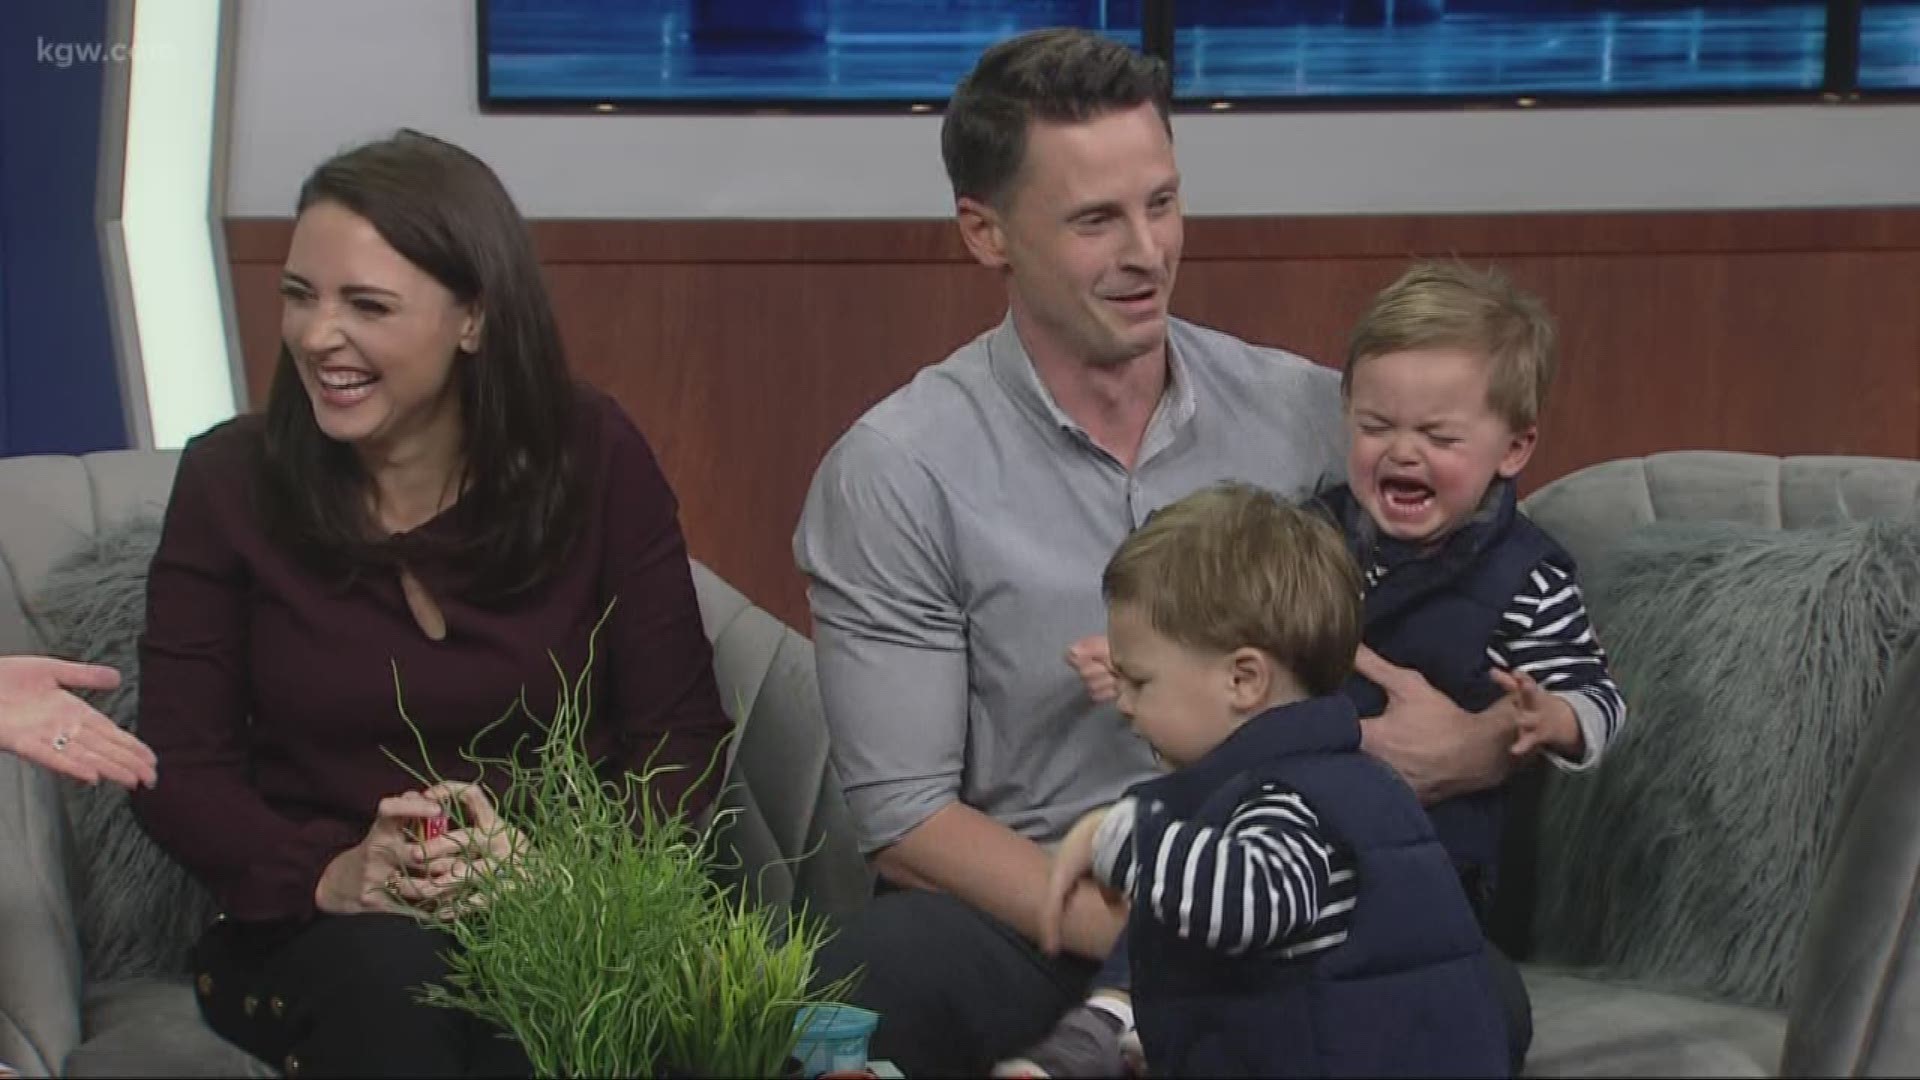 It was supposed to go like this. It's been twins week on KGW. Let's end it with new KGW anchor Dan Haggerty and his wife, investigative reporter Cristine Severance, bringing their adorable sons Will and Miles onto the set. What happens next is a bit cring